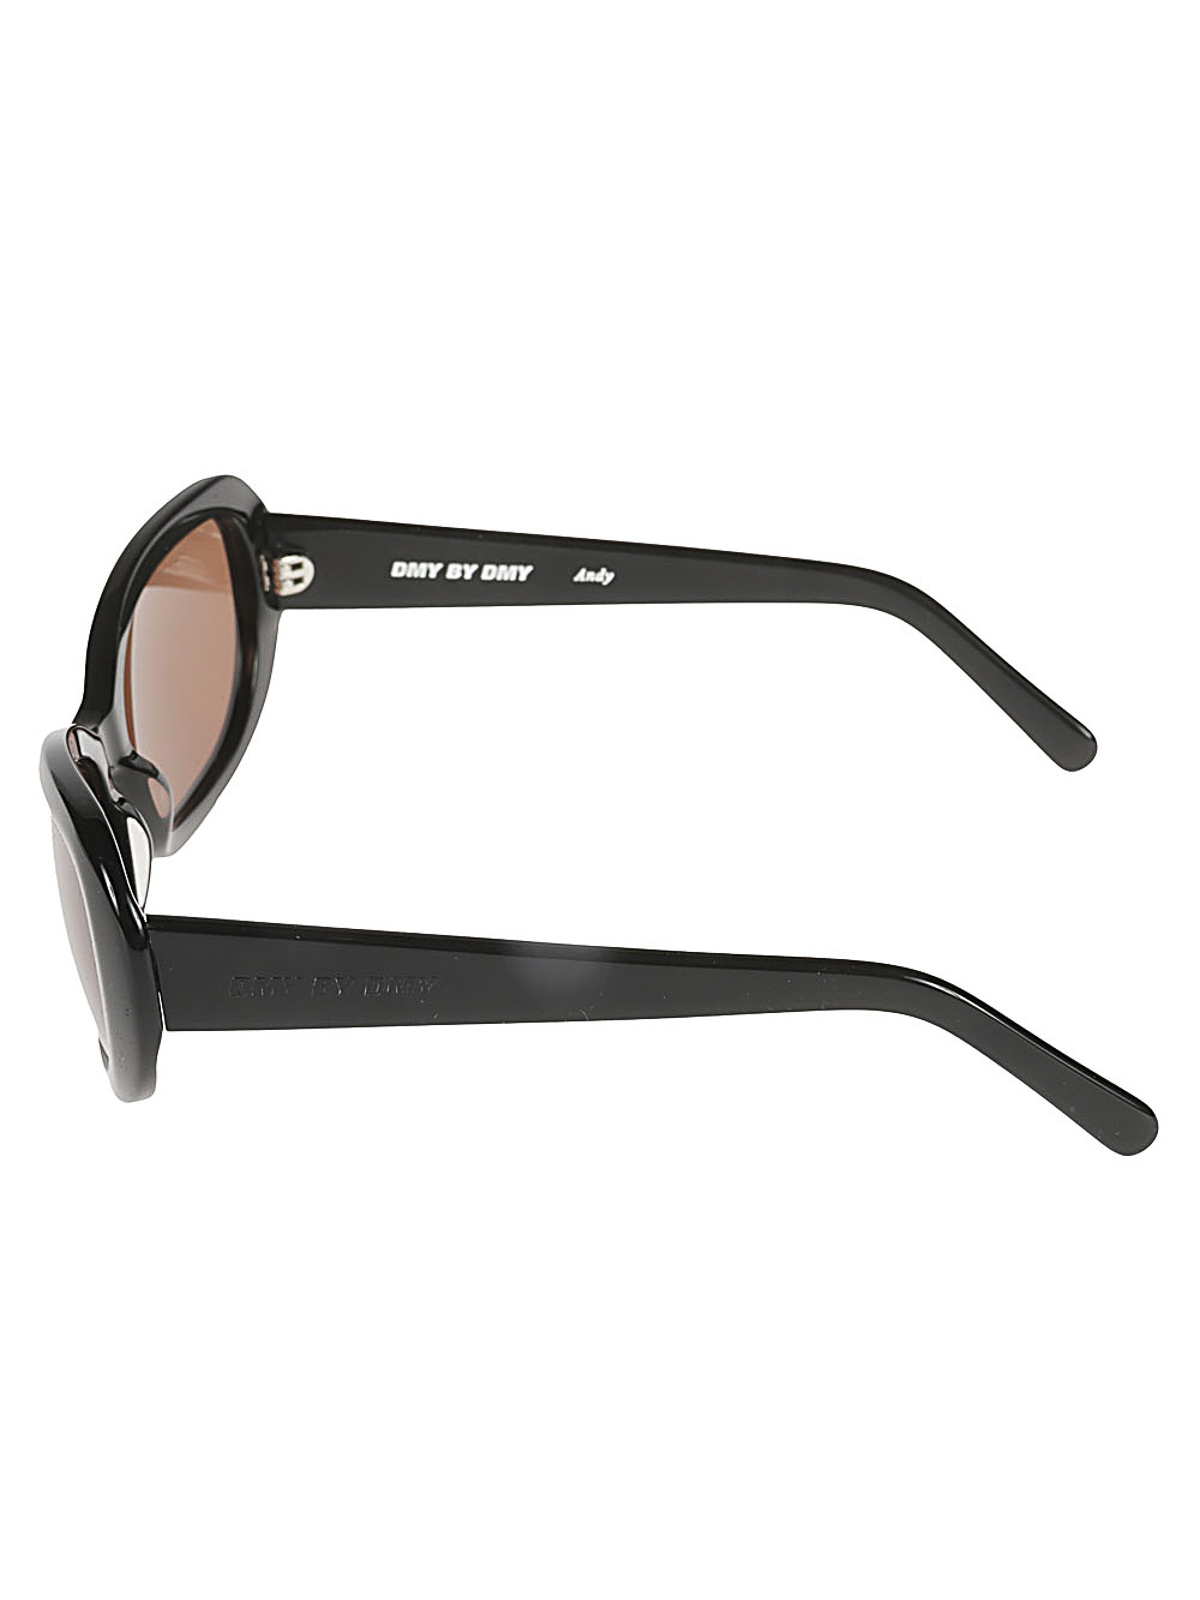 Sunglasses Dmy By Dmy - Andy sunglasses - DMY09SBBLACK